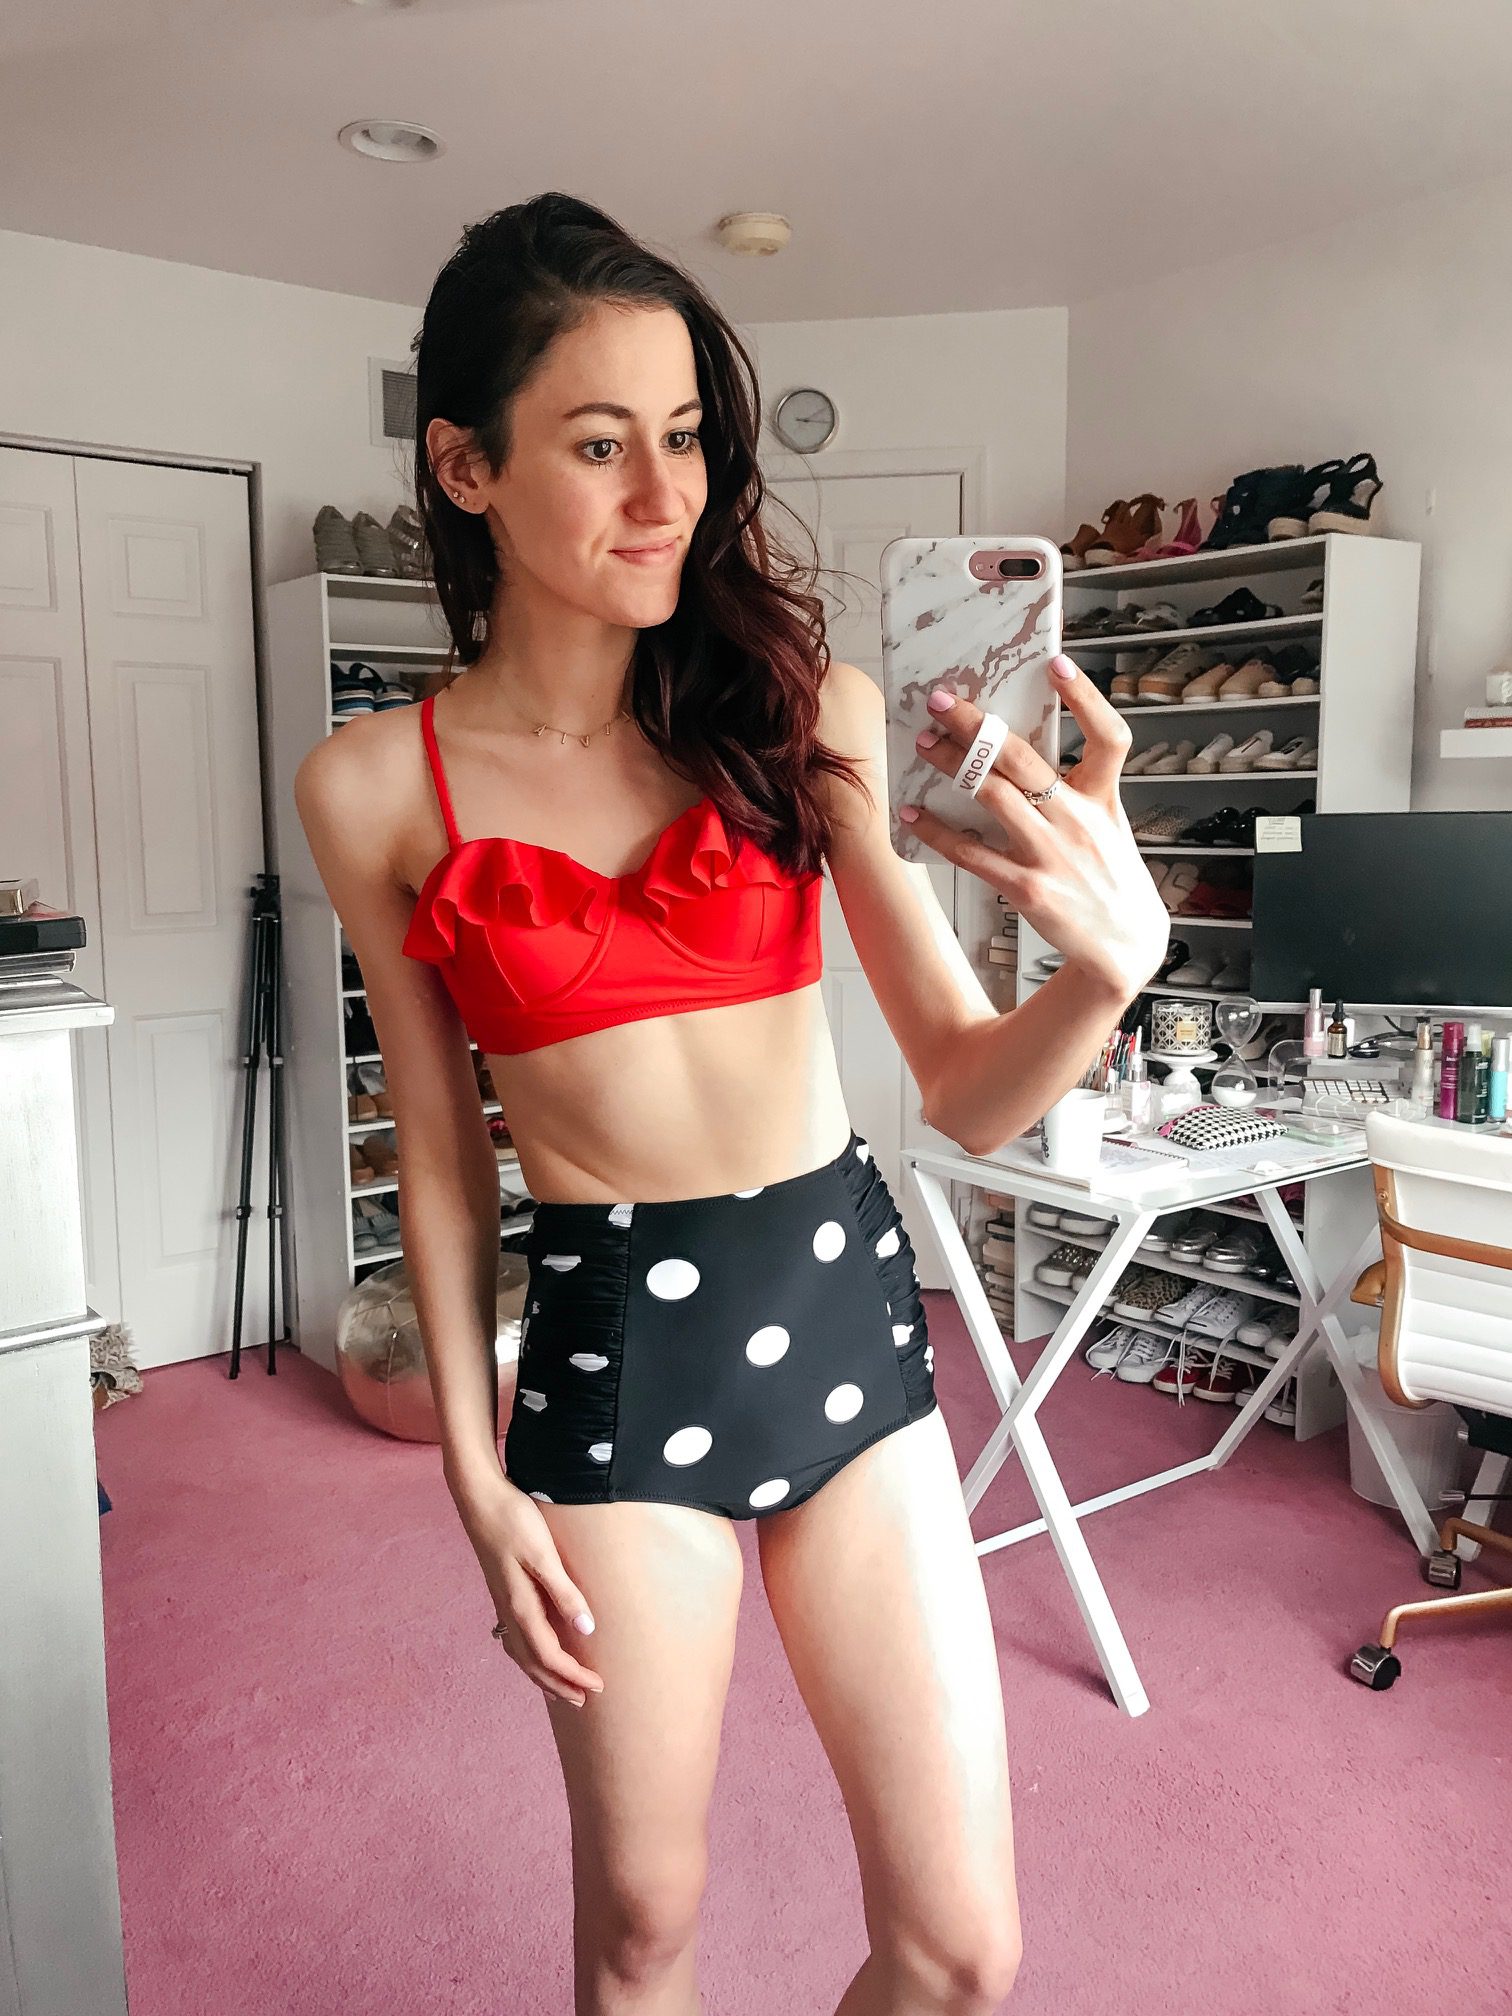 AMAZON SWIM HAUL - 10 SWIMSUITS UNDER $30 on Coming Up Roses (+ 3 non-Amazon options for $40!)